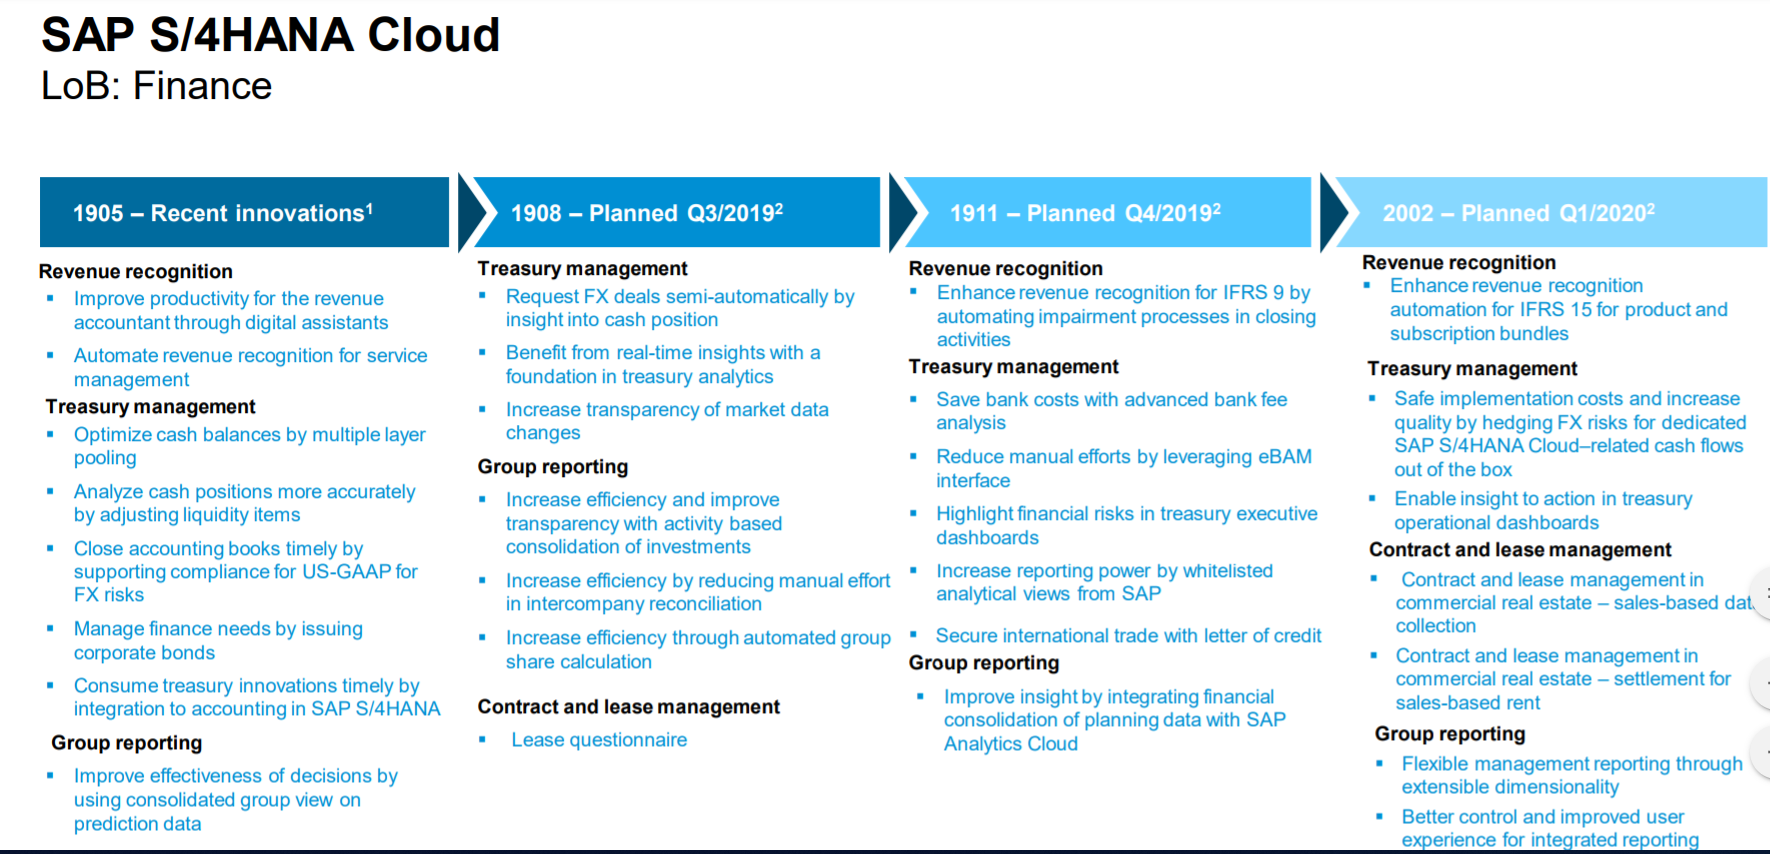 What is the road map for SAP S/4HANA Cloud?